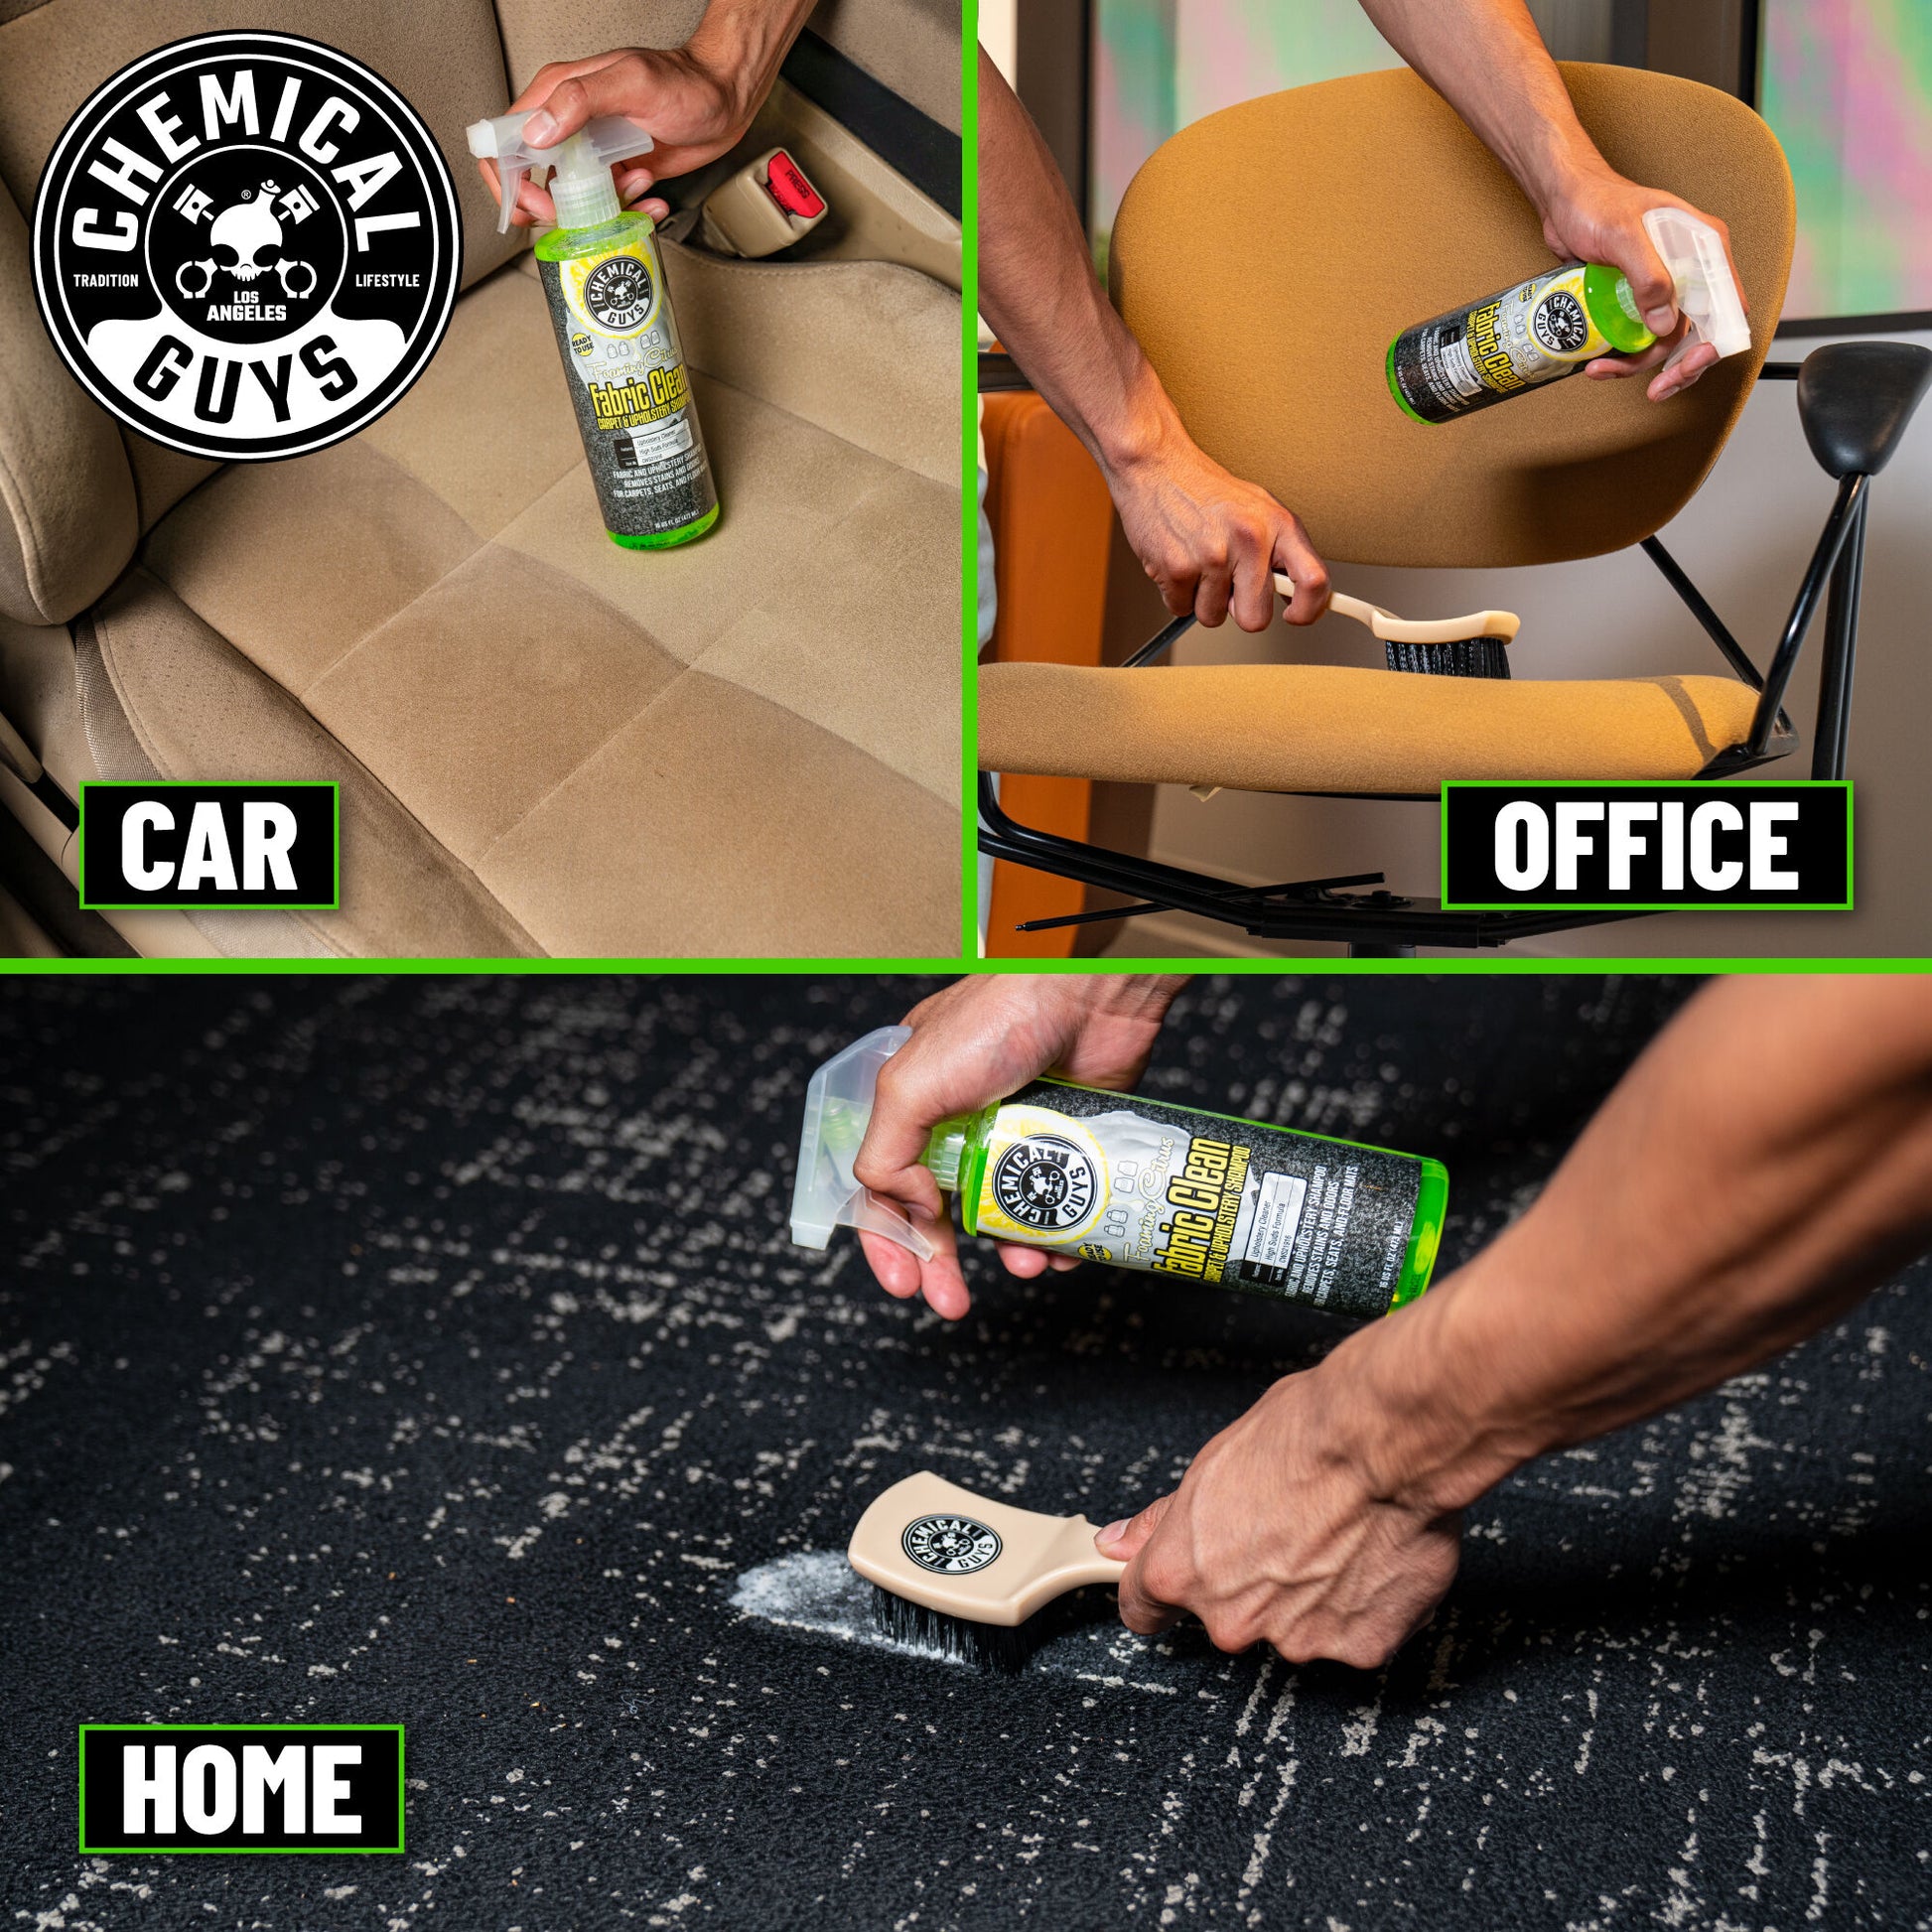  Chemical Guys CWS20316 Foaming Citrus Fabric Clean Carpet &  Upholstery Cleaner (Car Carpets, Seats & Floor Mats), Safe for Cars, Home,  Office, & More, 16 fl oz, Citrus Scent : Everything